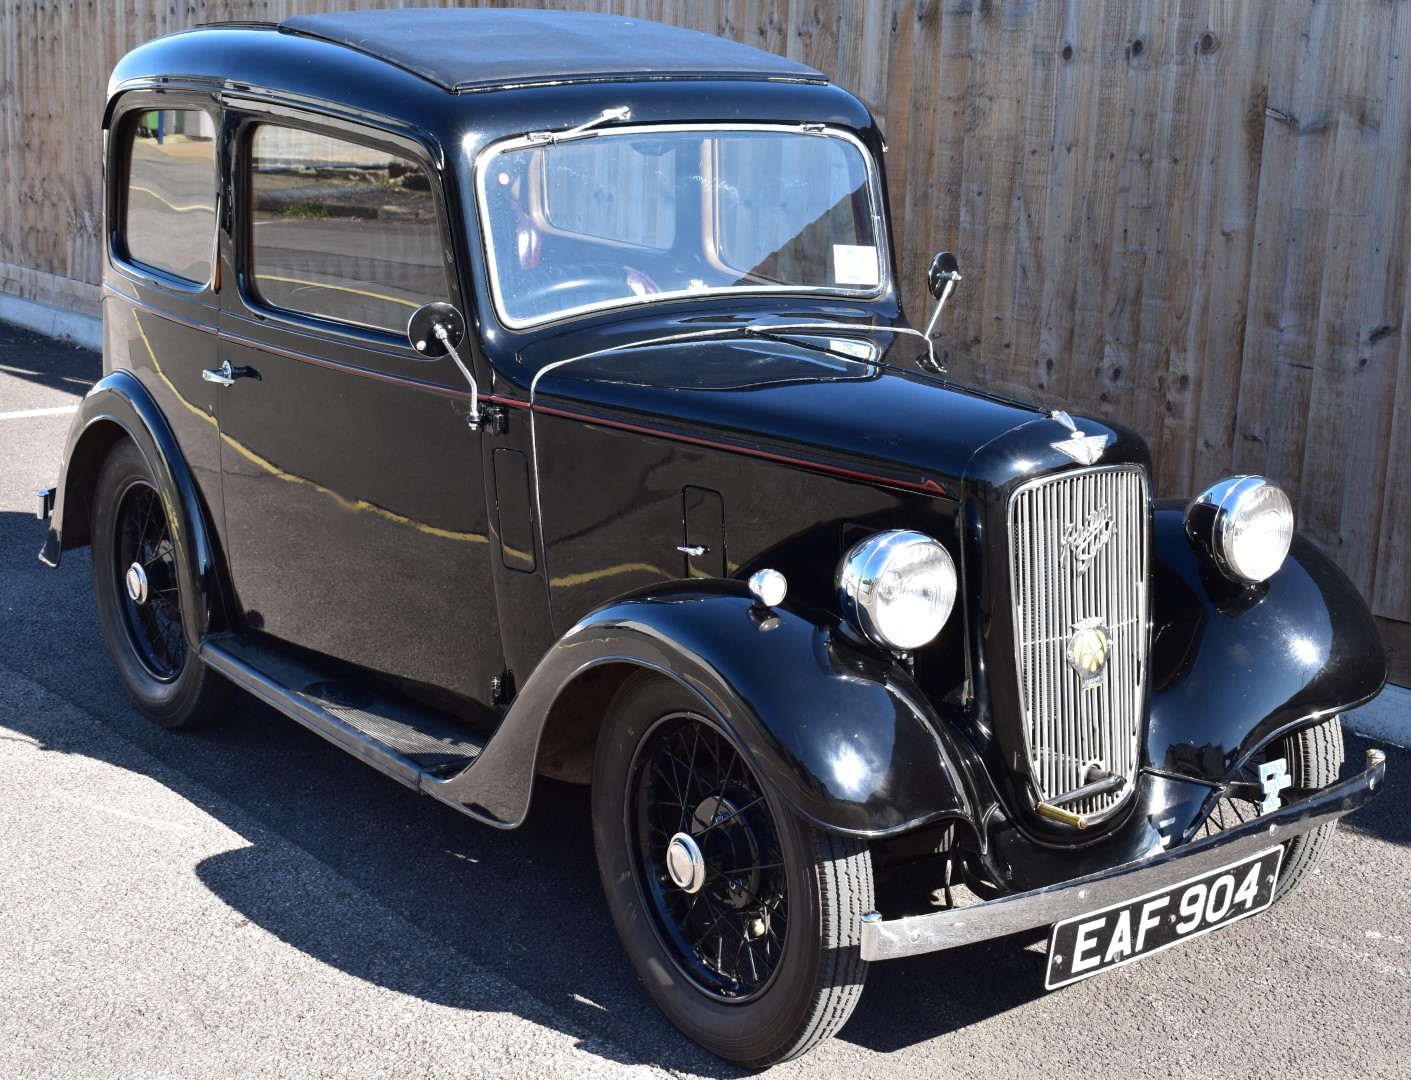 1938 Austin Seven Ruby, registration number EAF 904, with continuation 1964 buff logbook and V5c, - Image 14 of 24